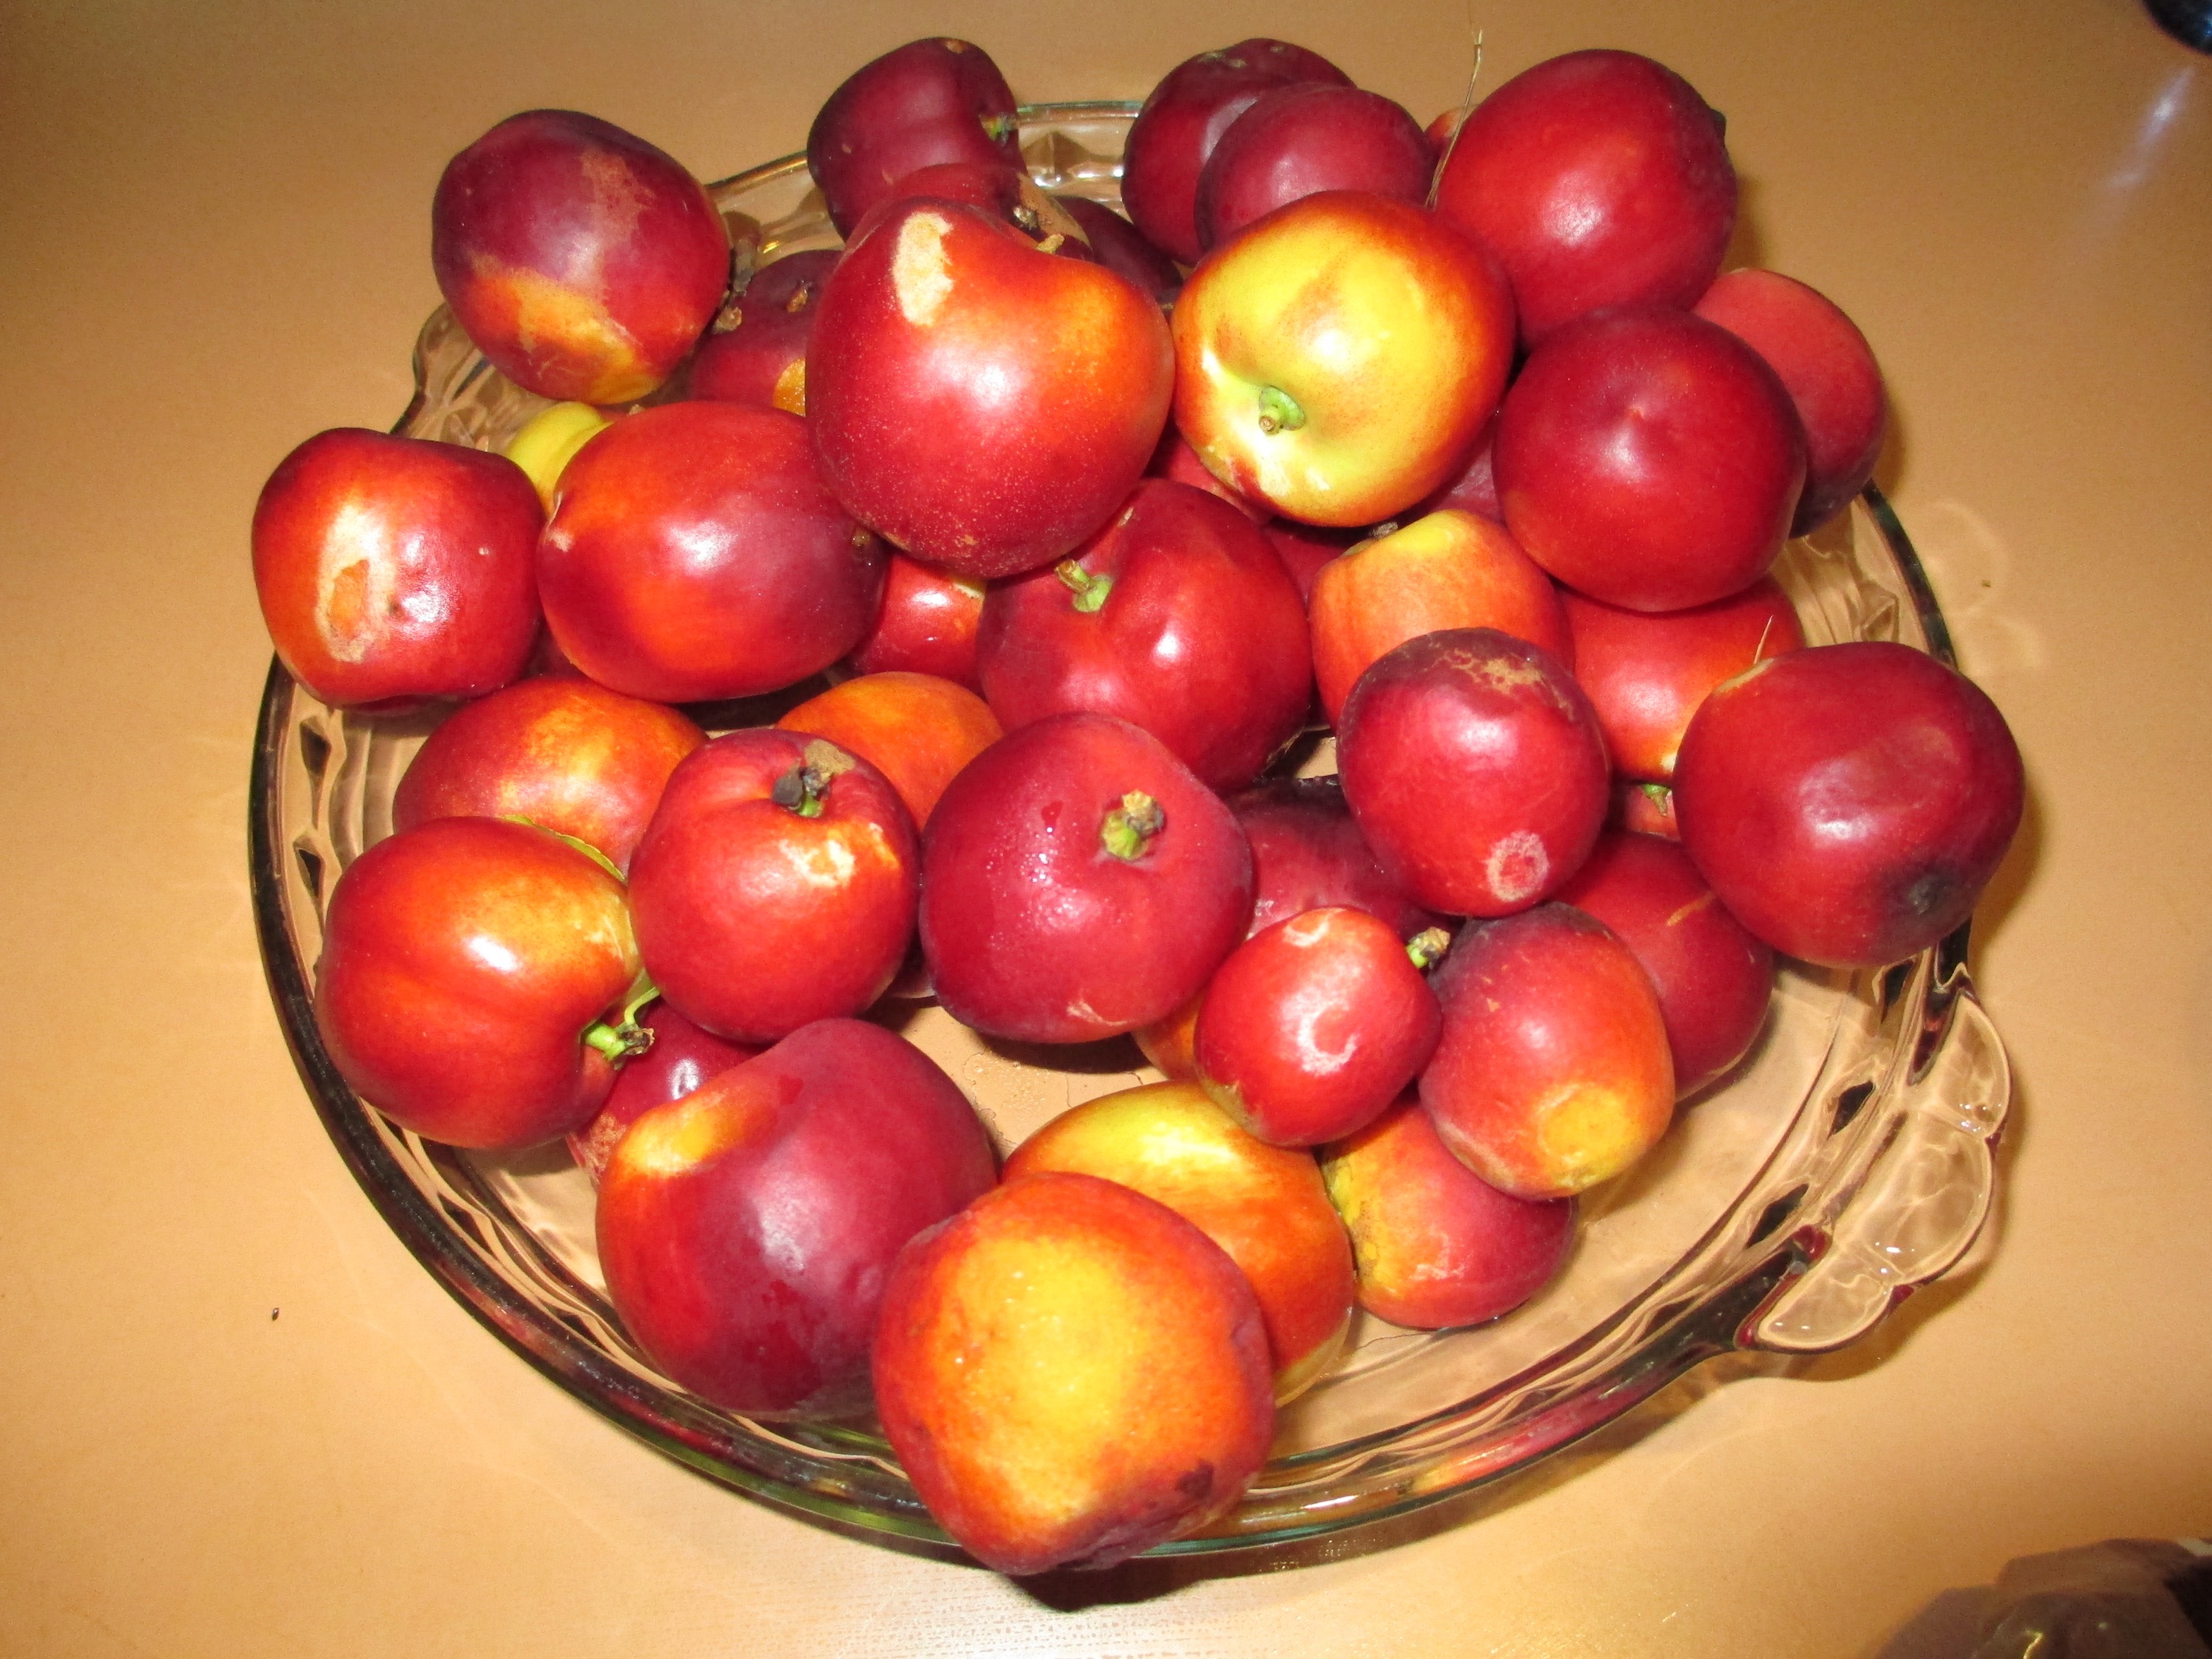 One day's harvest of nectarines!